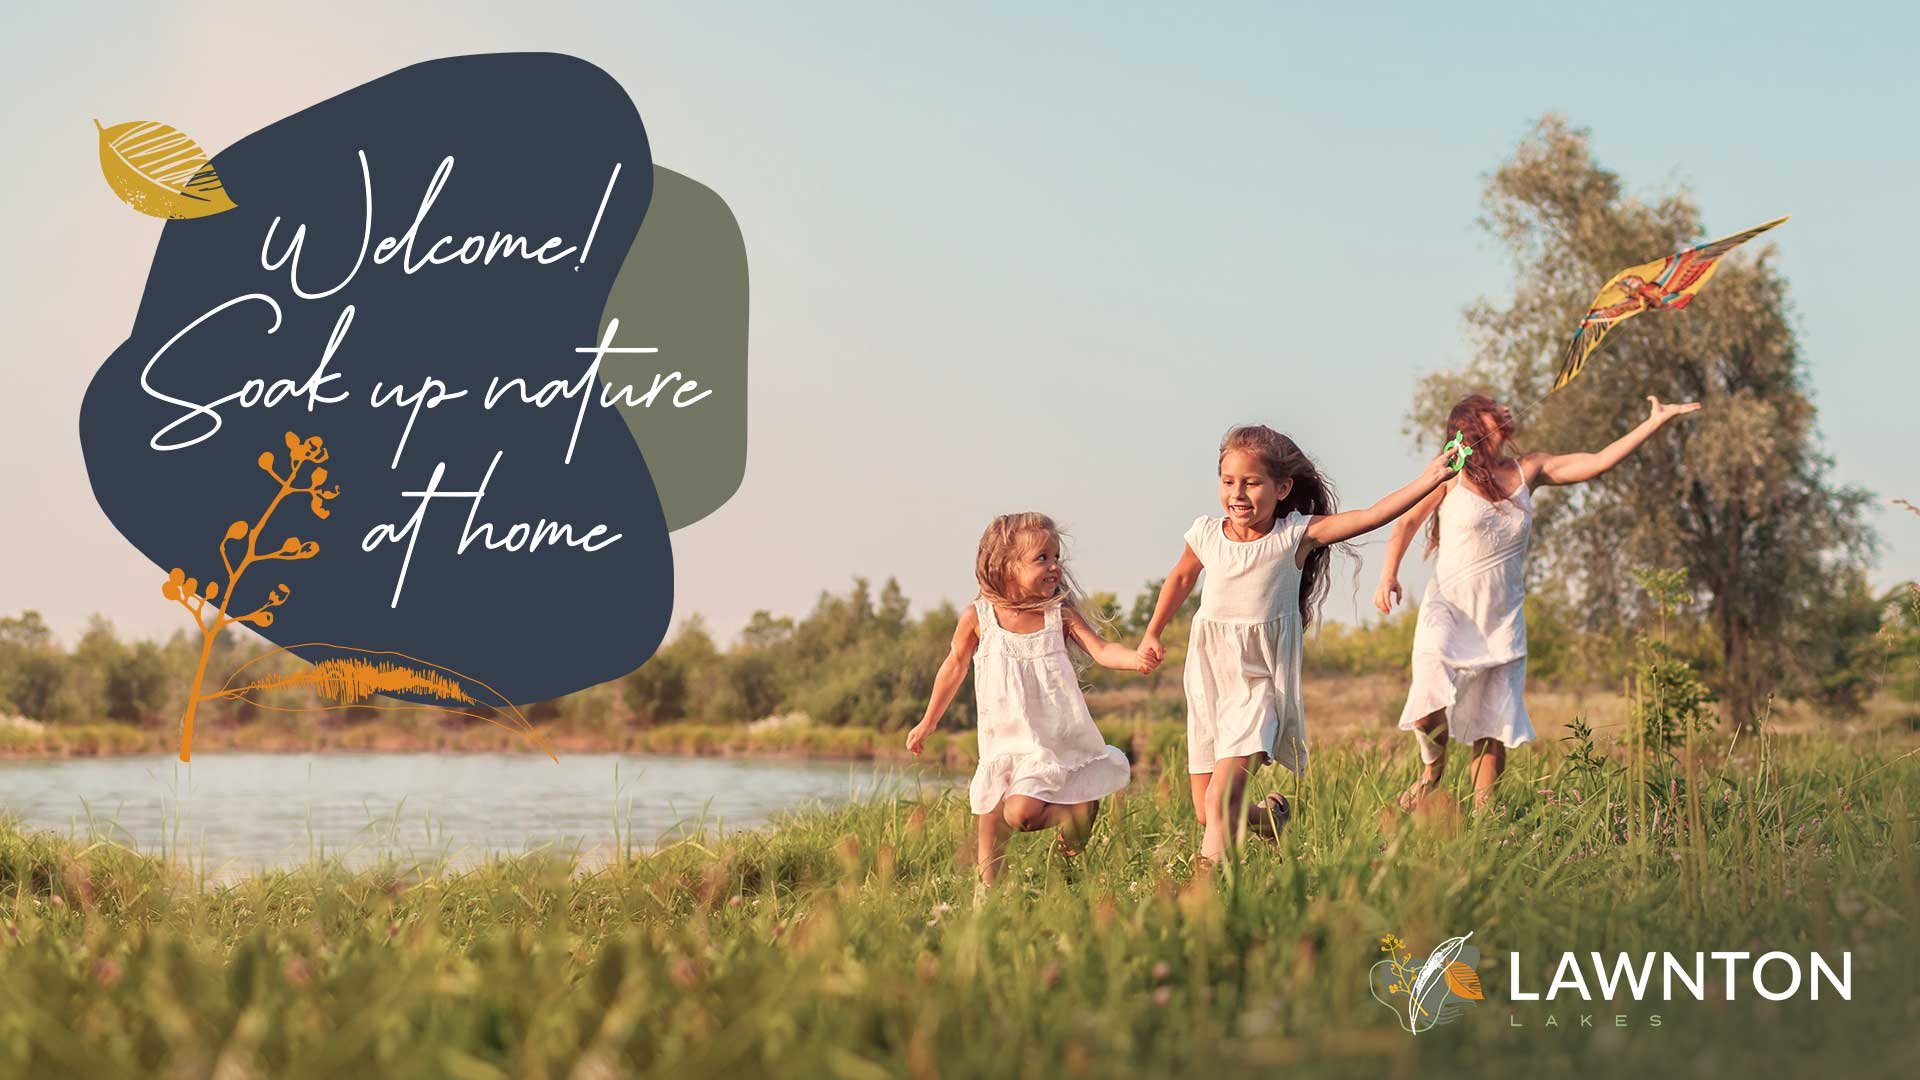 Idealic lake image with dusk sky colours and children running through grass with 'welcome! Soak up nature at home' and Lawnton Lakes logo.